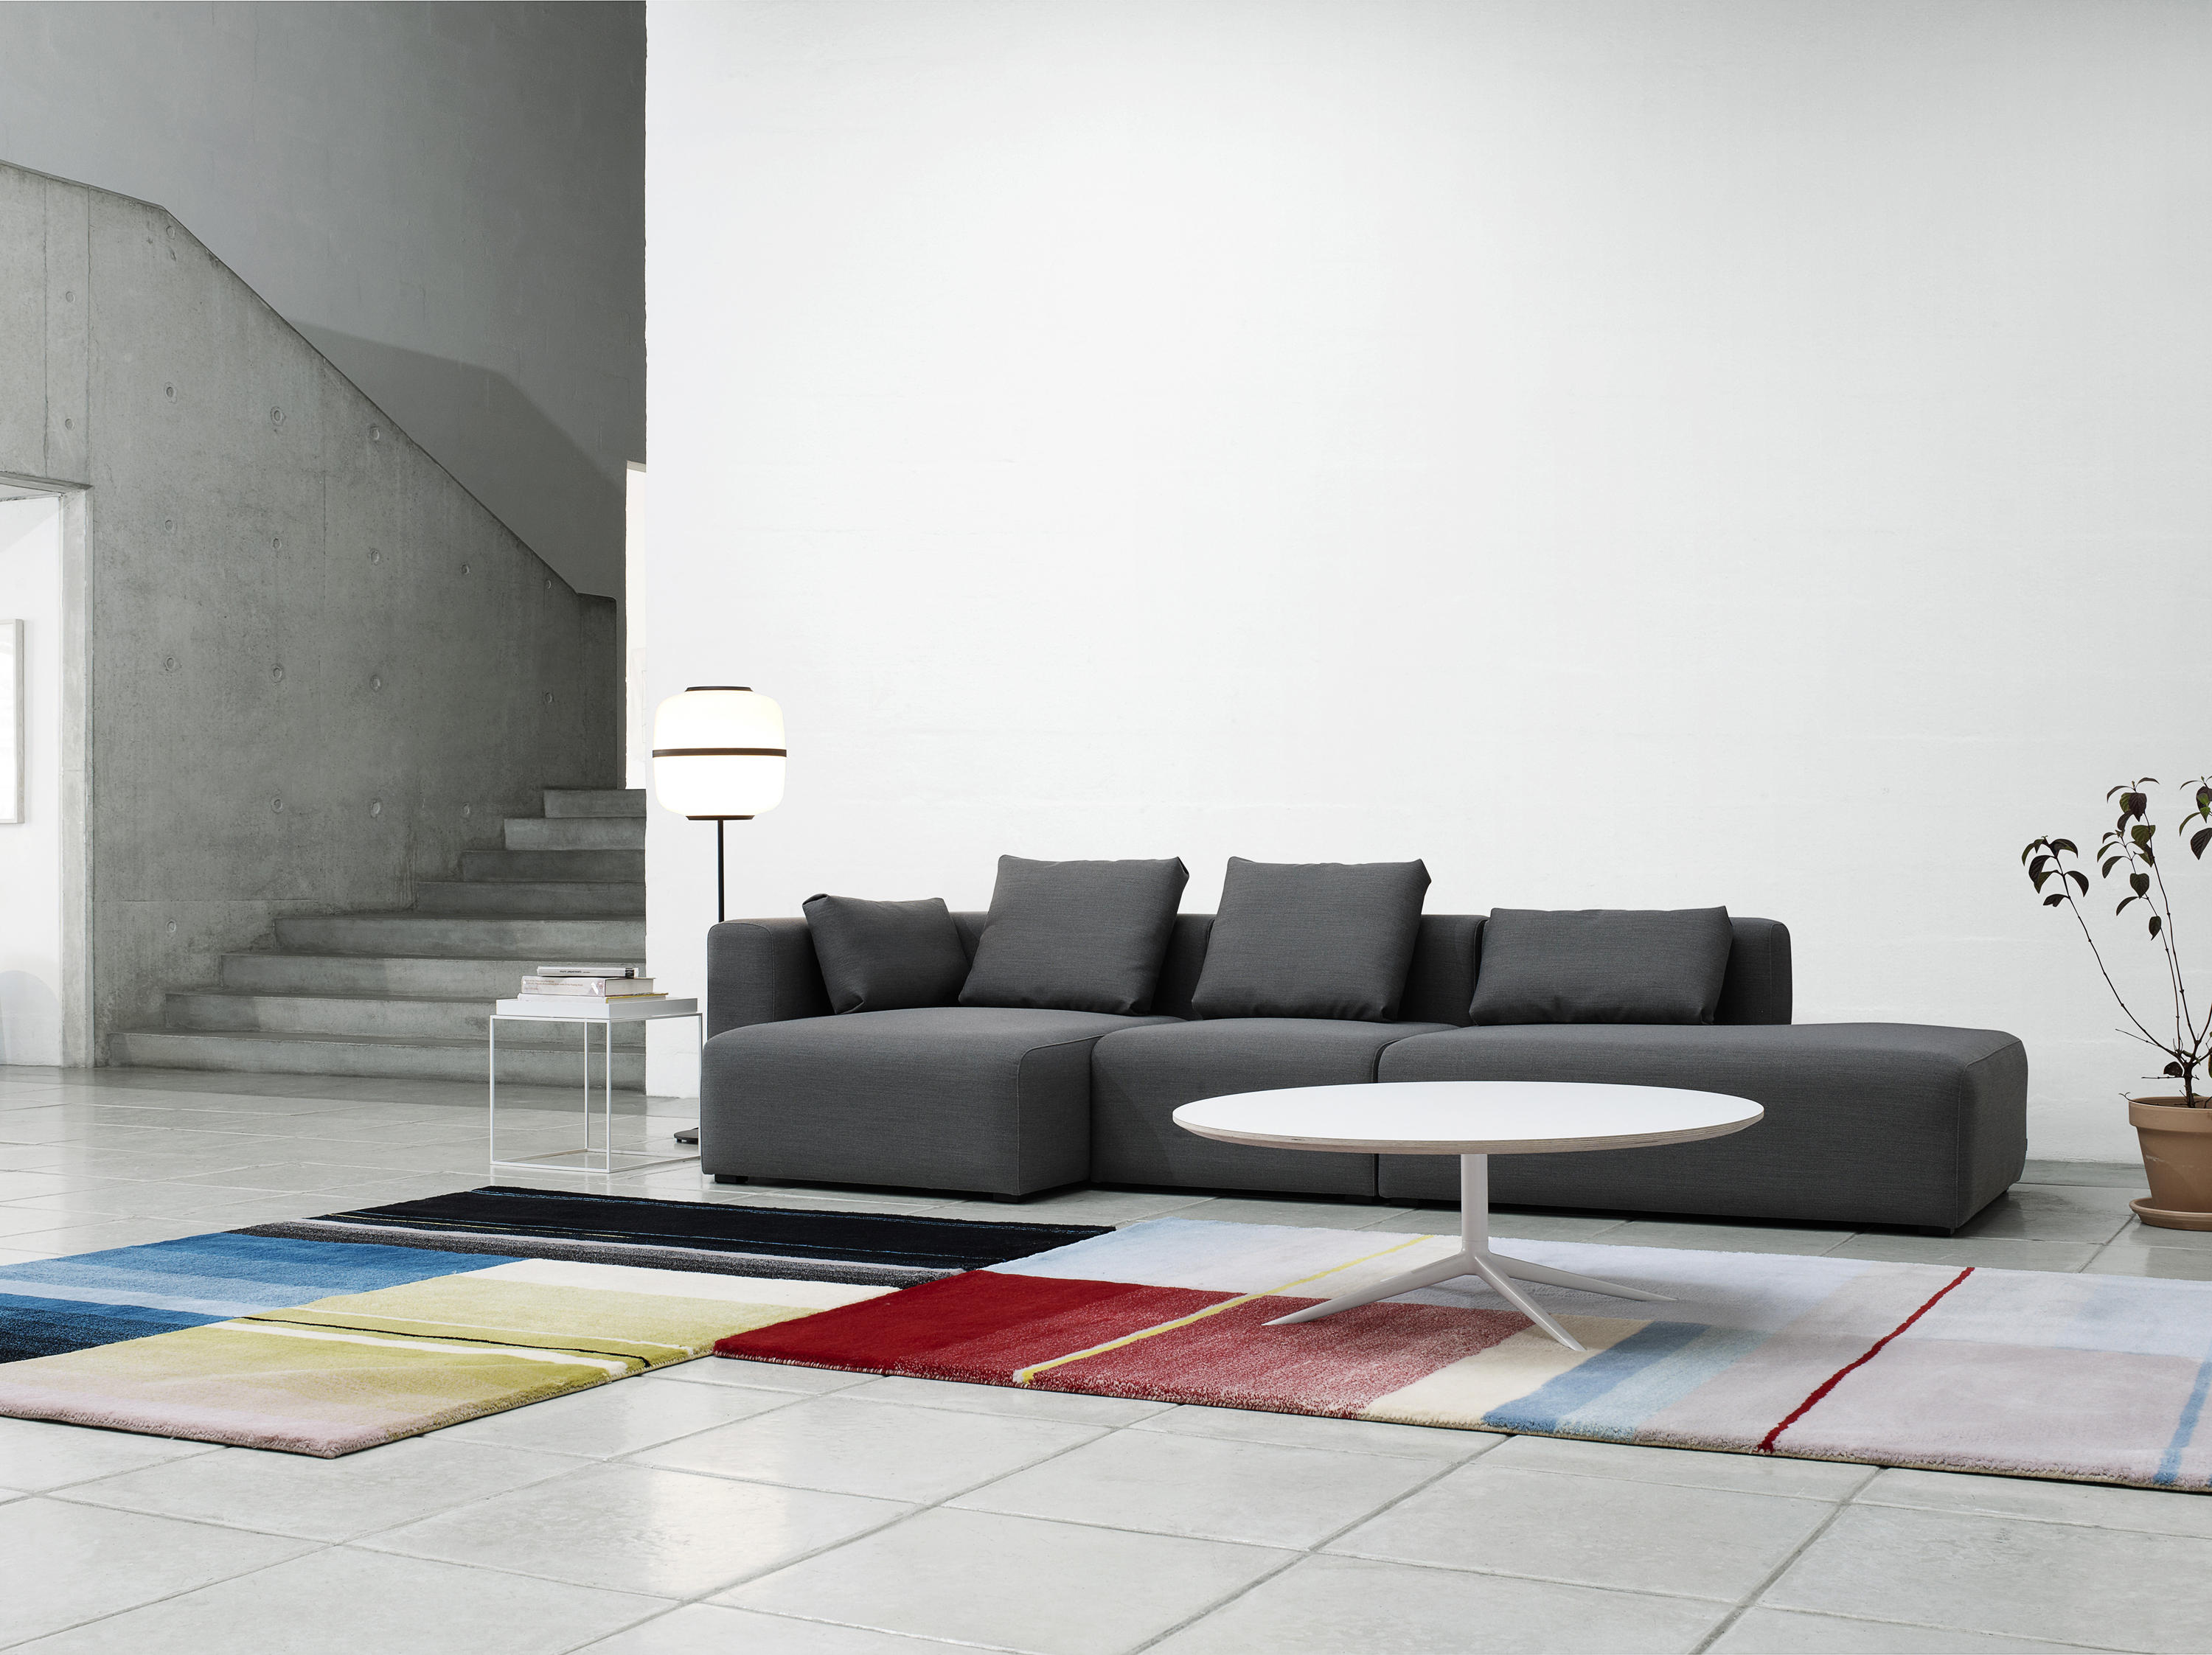 MAGS SOFT SOFA Modular sofa systems from Hay